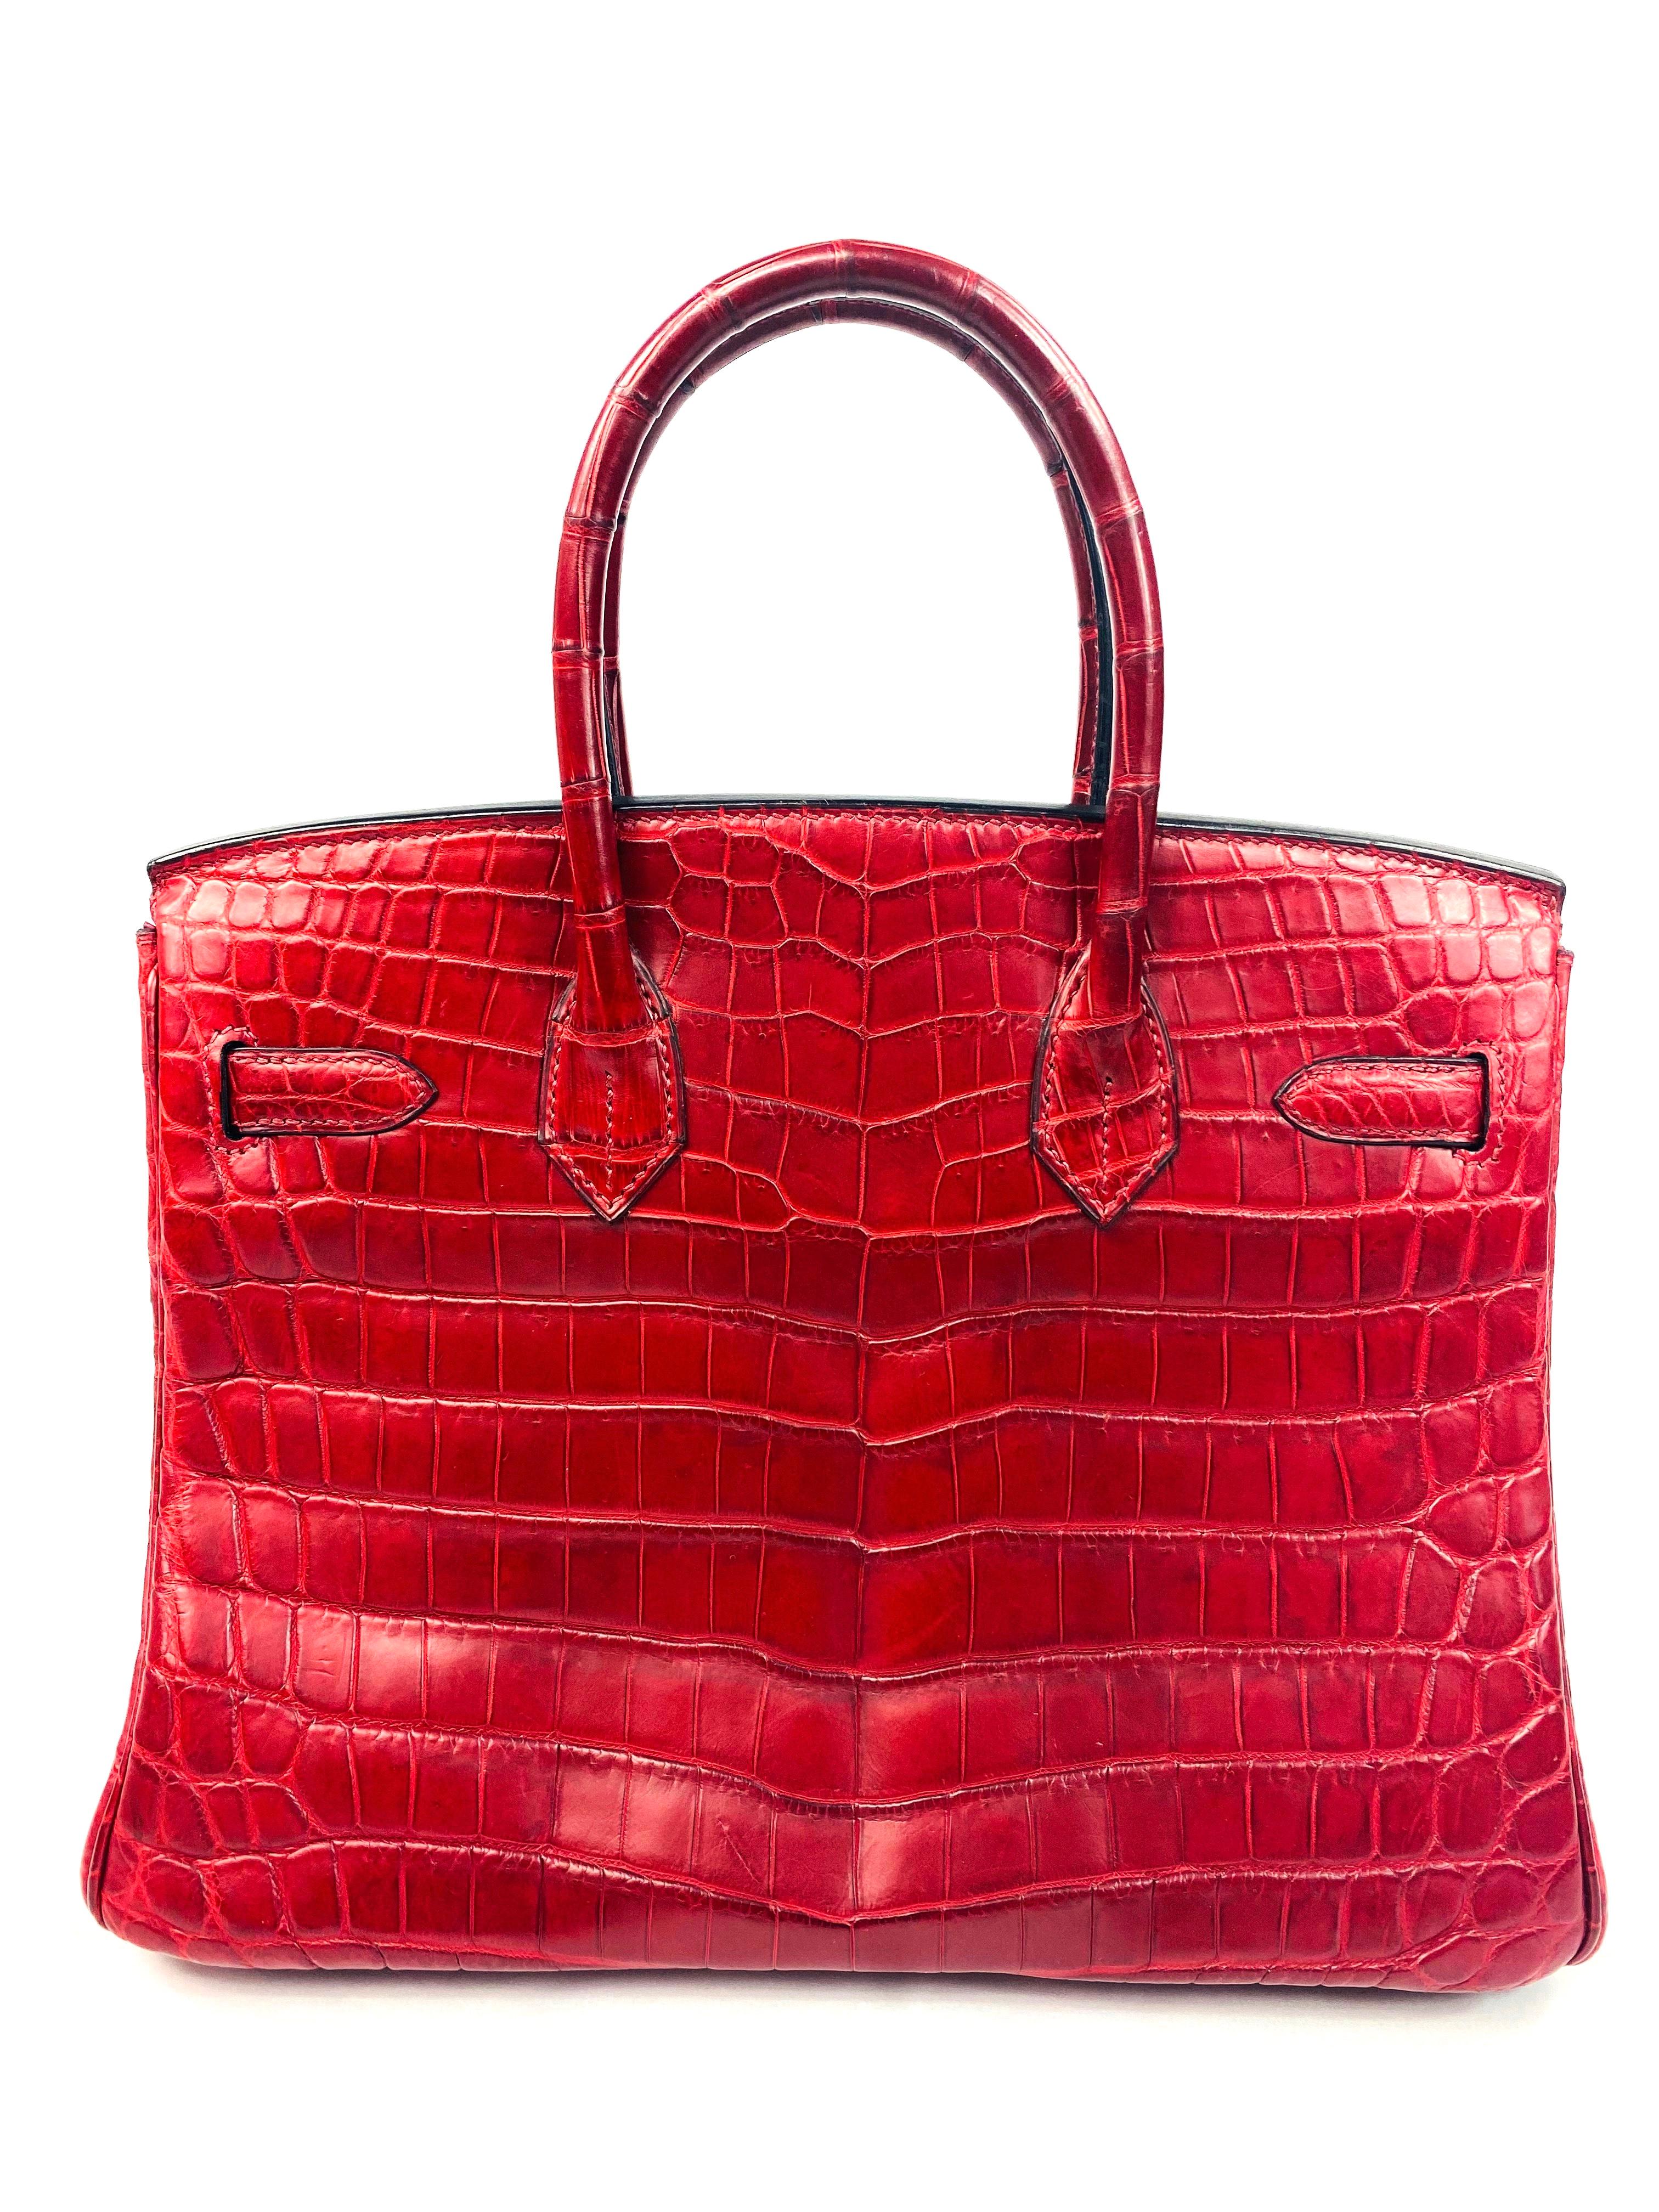 Hermès Niloticus Red Crocodile Leather Birkin 30 Handbag In Excellent Condition In Beverly Hills, CA